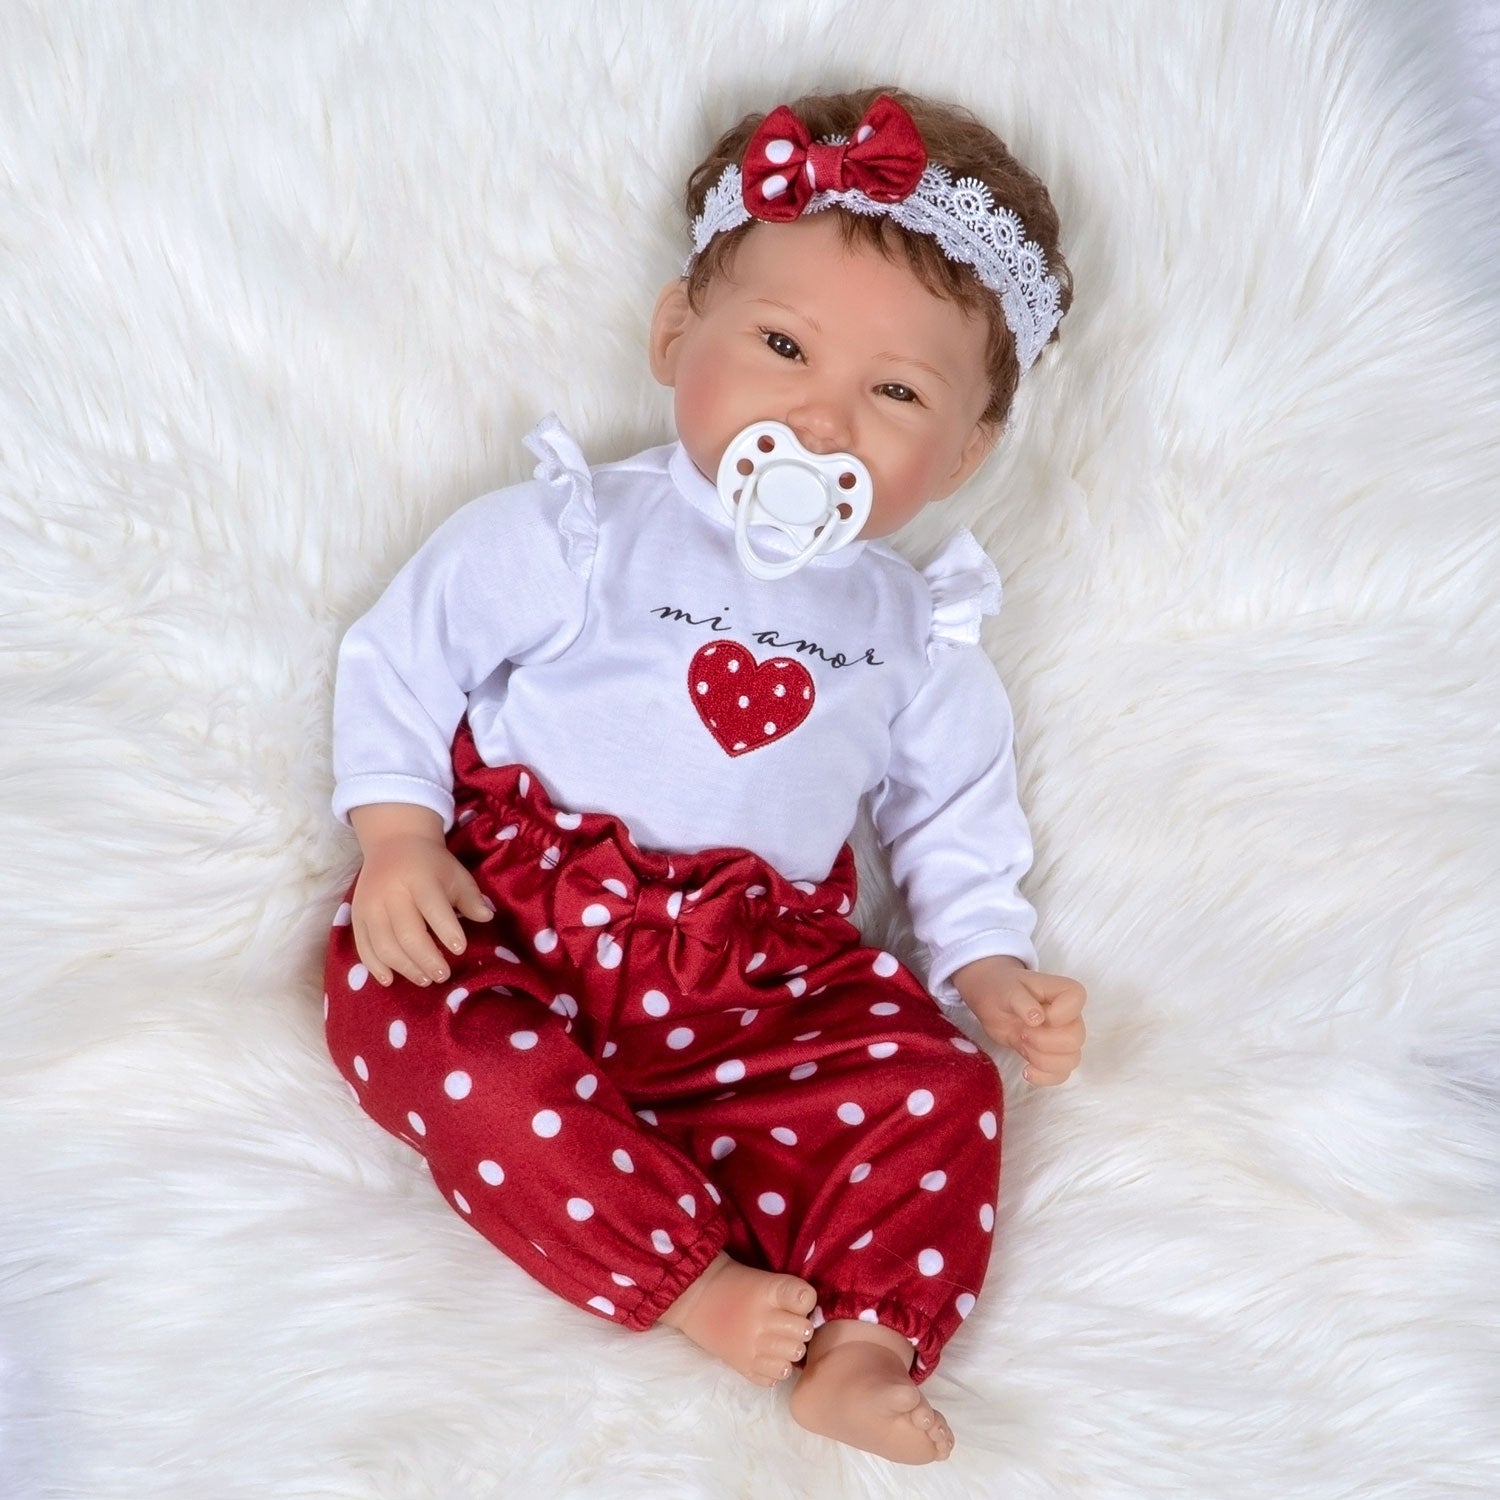 Paradise Galleries Mi Amor - Realistic Toddler Doll with heartbeat mechanism that really beats when you hug her!, 19 Inch Reborn Doll in GentleTouch Vinyl by Reborn Artist, Mayra Garza